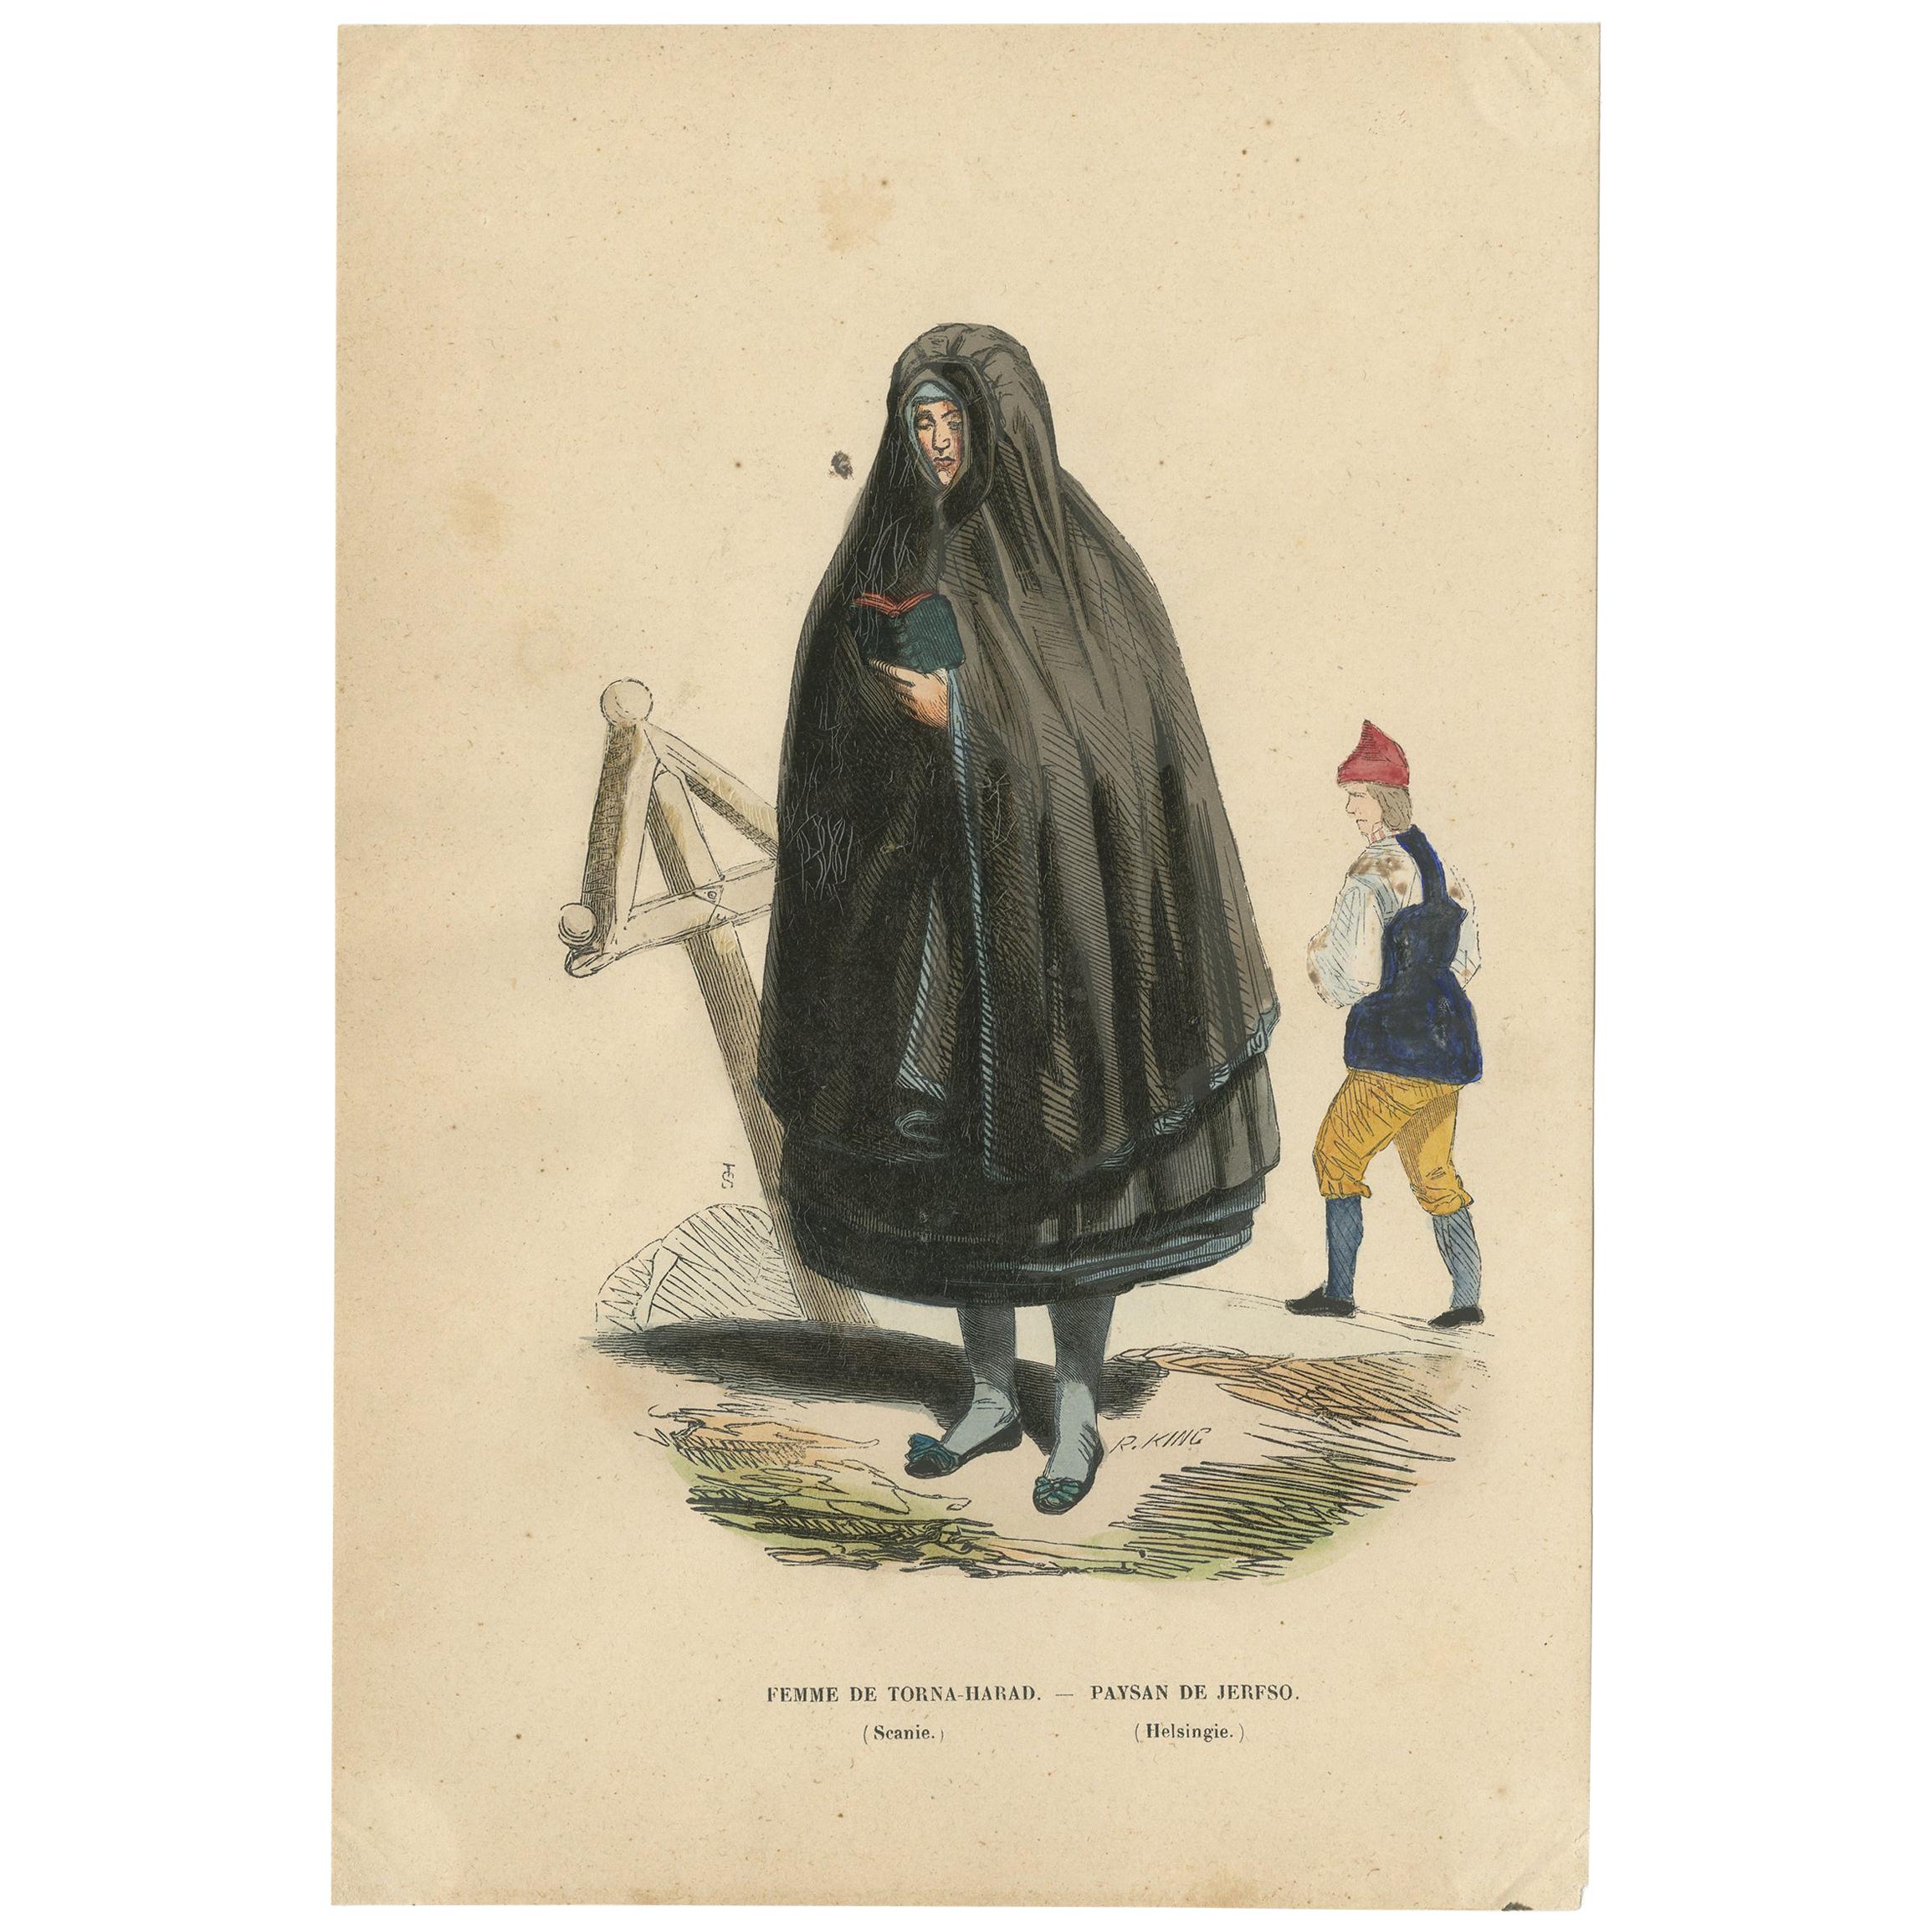 Antique Costume Print of a Female and Peasant in Scandinavian Costume by Wahlen